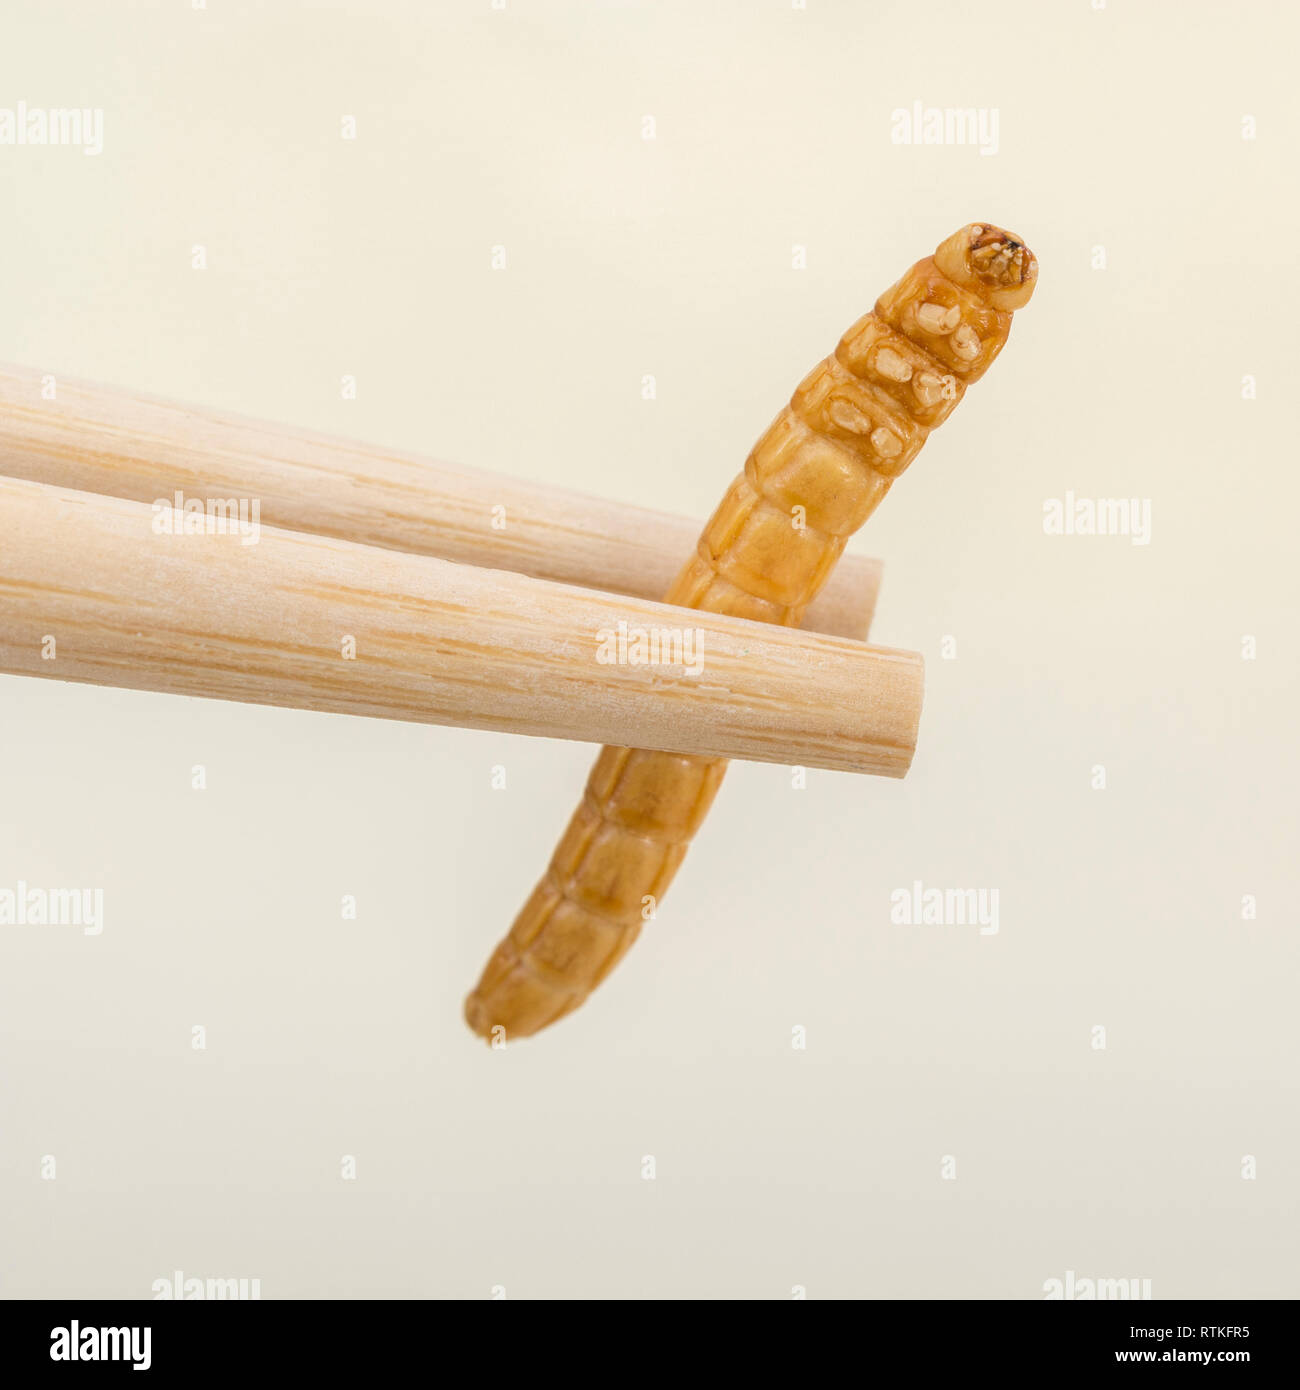 Edible Mealworms / Tenebrio molitor and chopsticks. Rich in protein edible  bugs are new Superfood. Edible insects abstract, bizarre insects as food  Stock Photo - Alamy